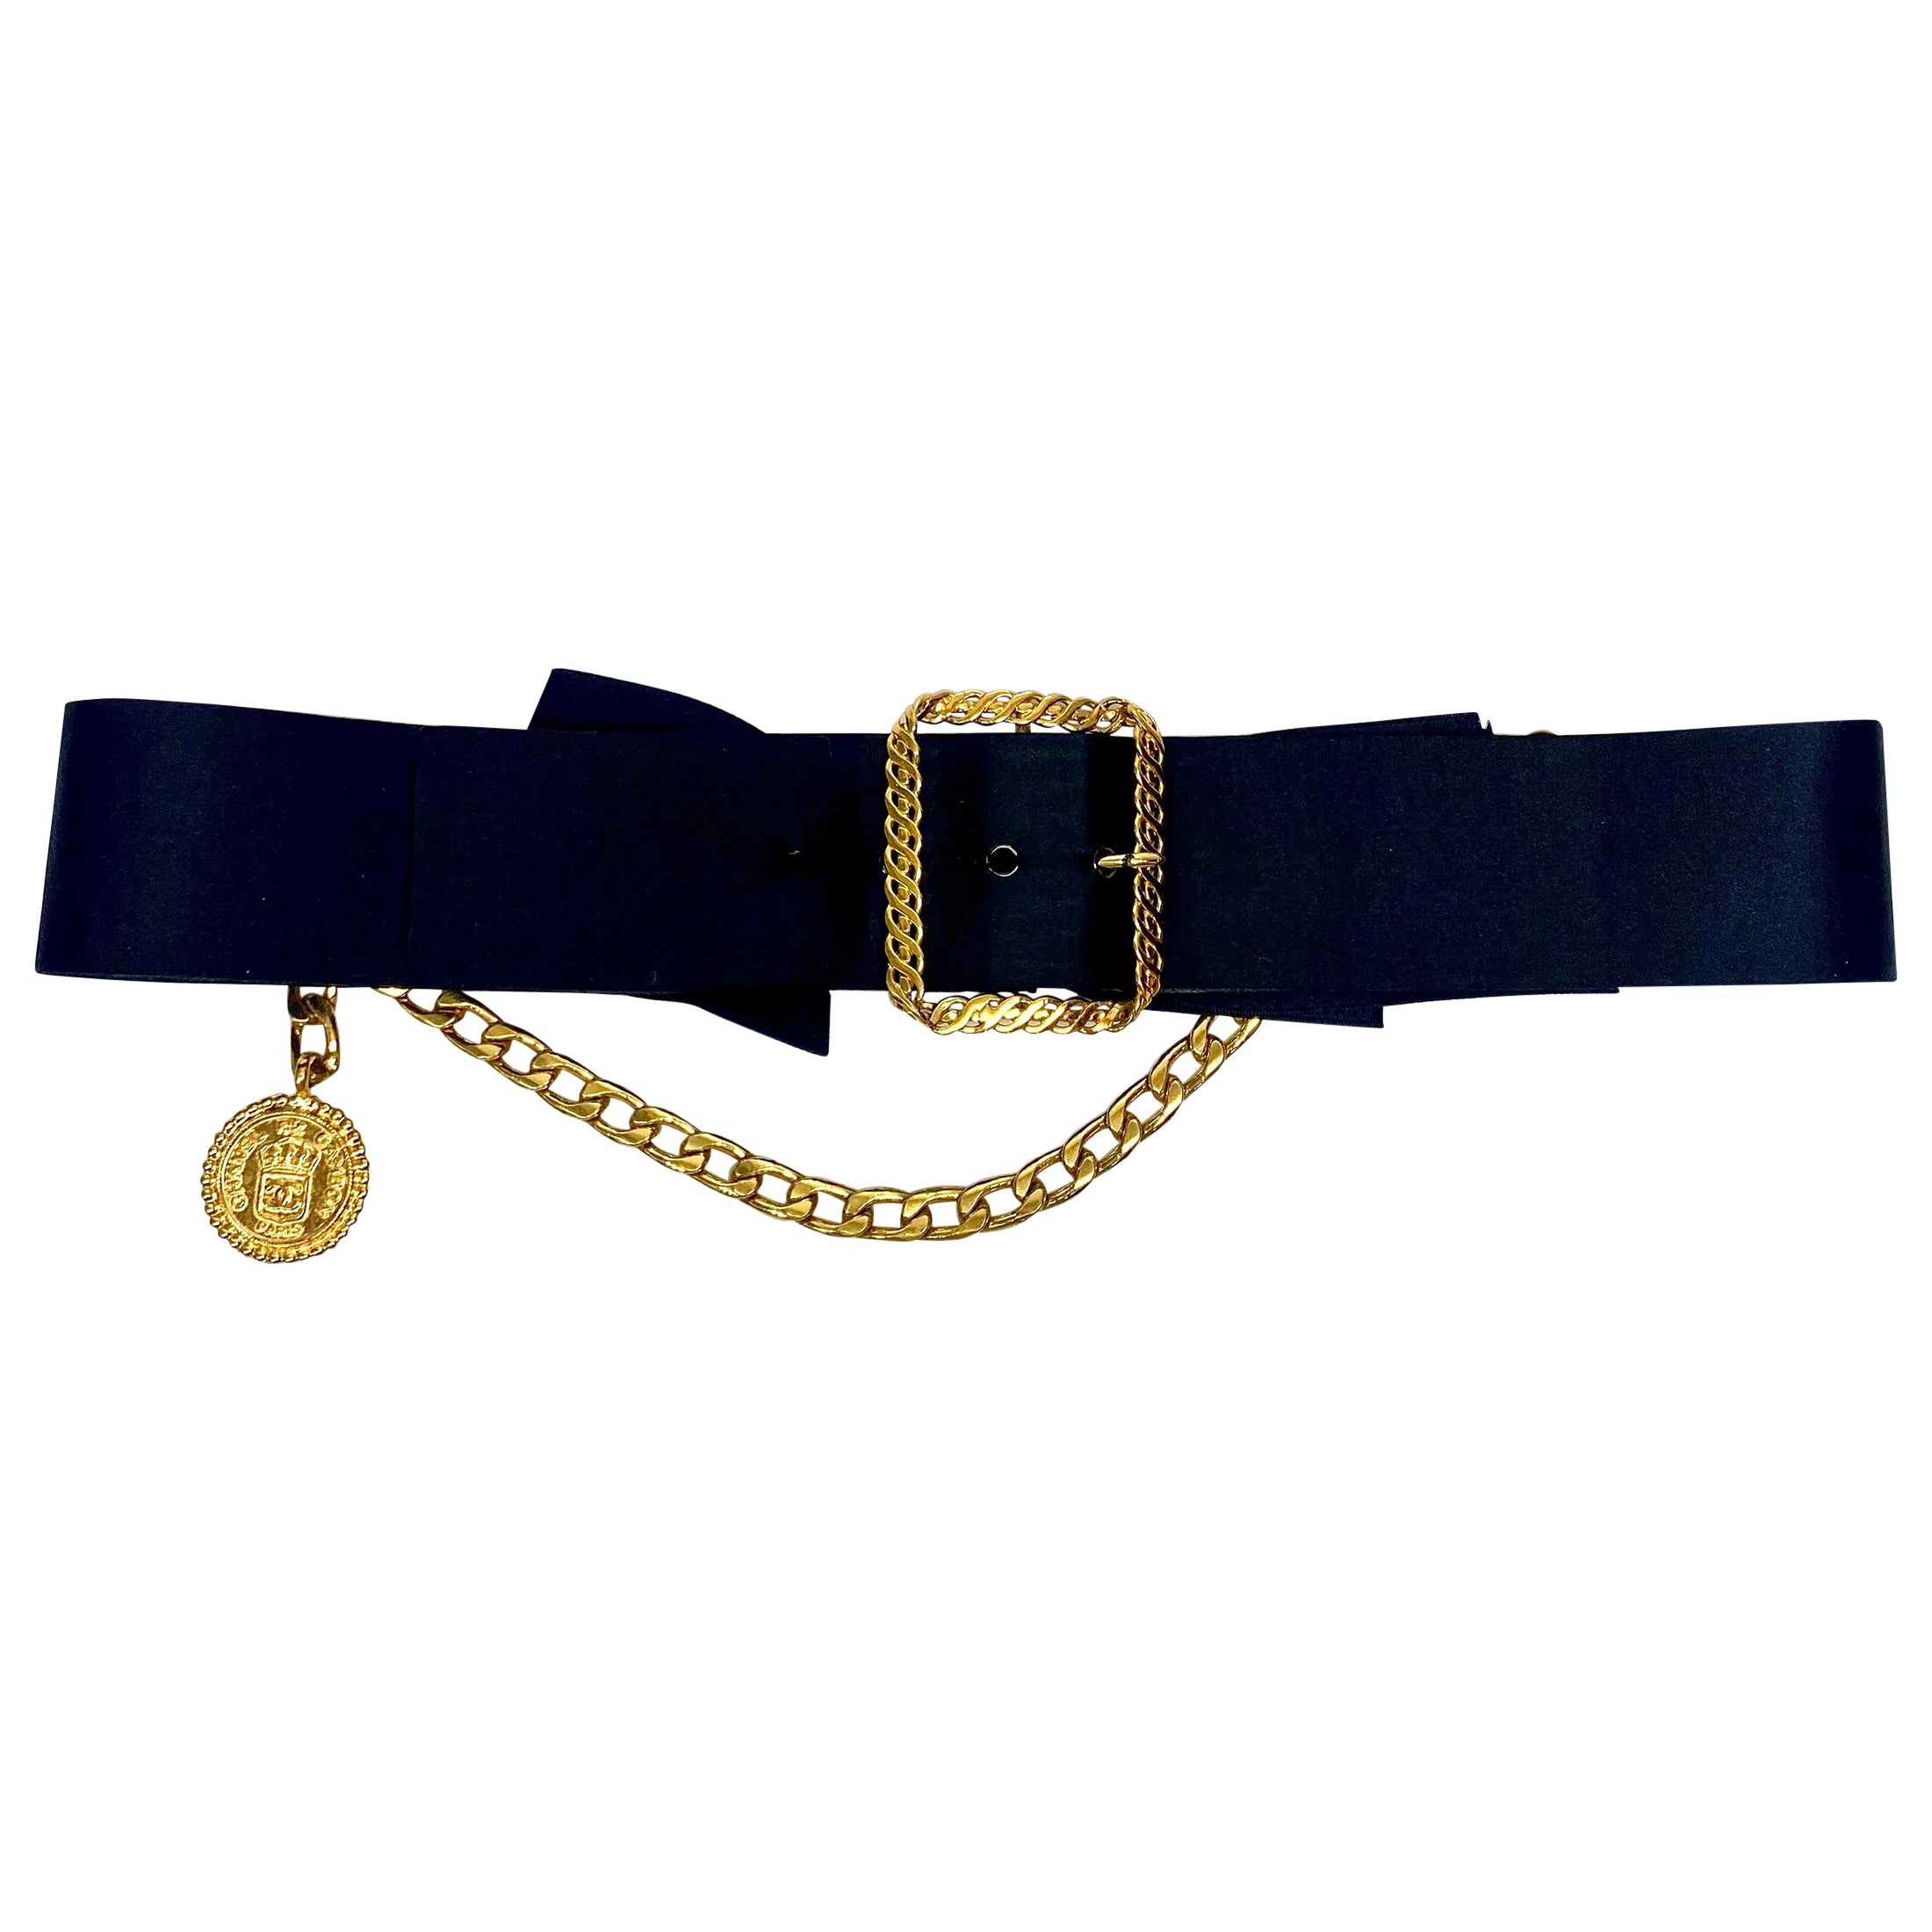 Chanel Vintage Black Satin Bow with Gold Buckle, Chain and Medalion Belt 